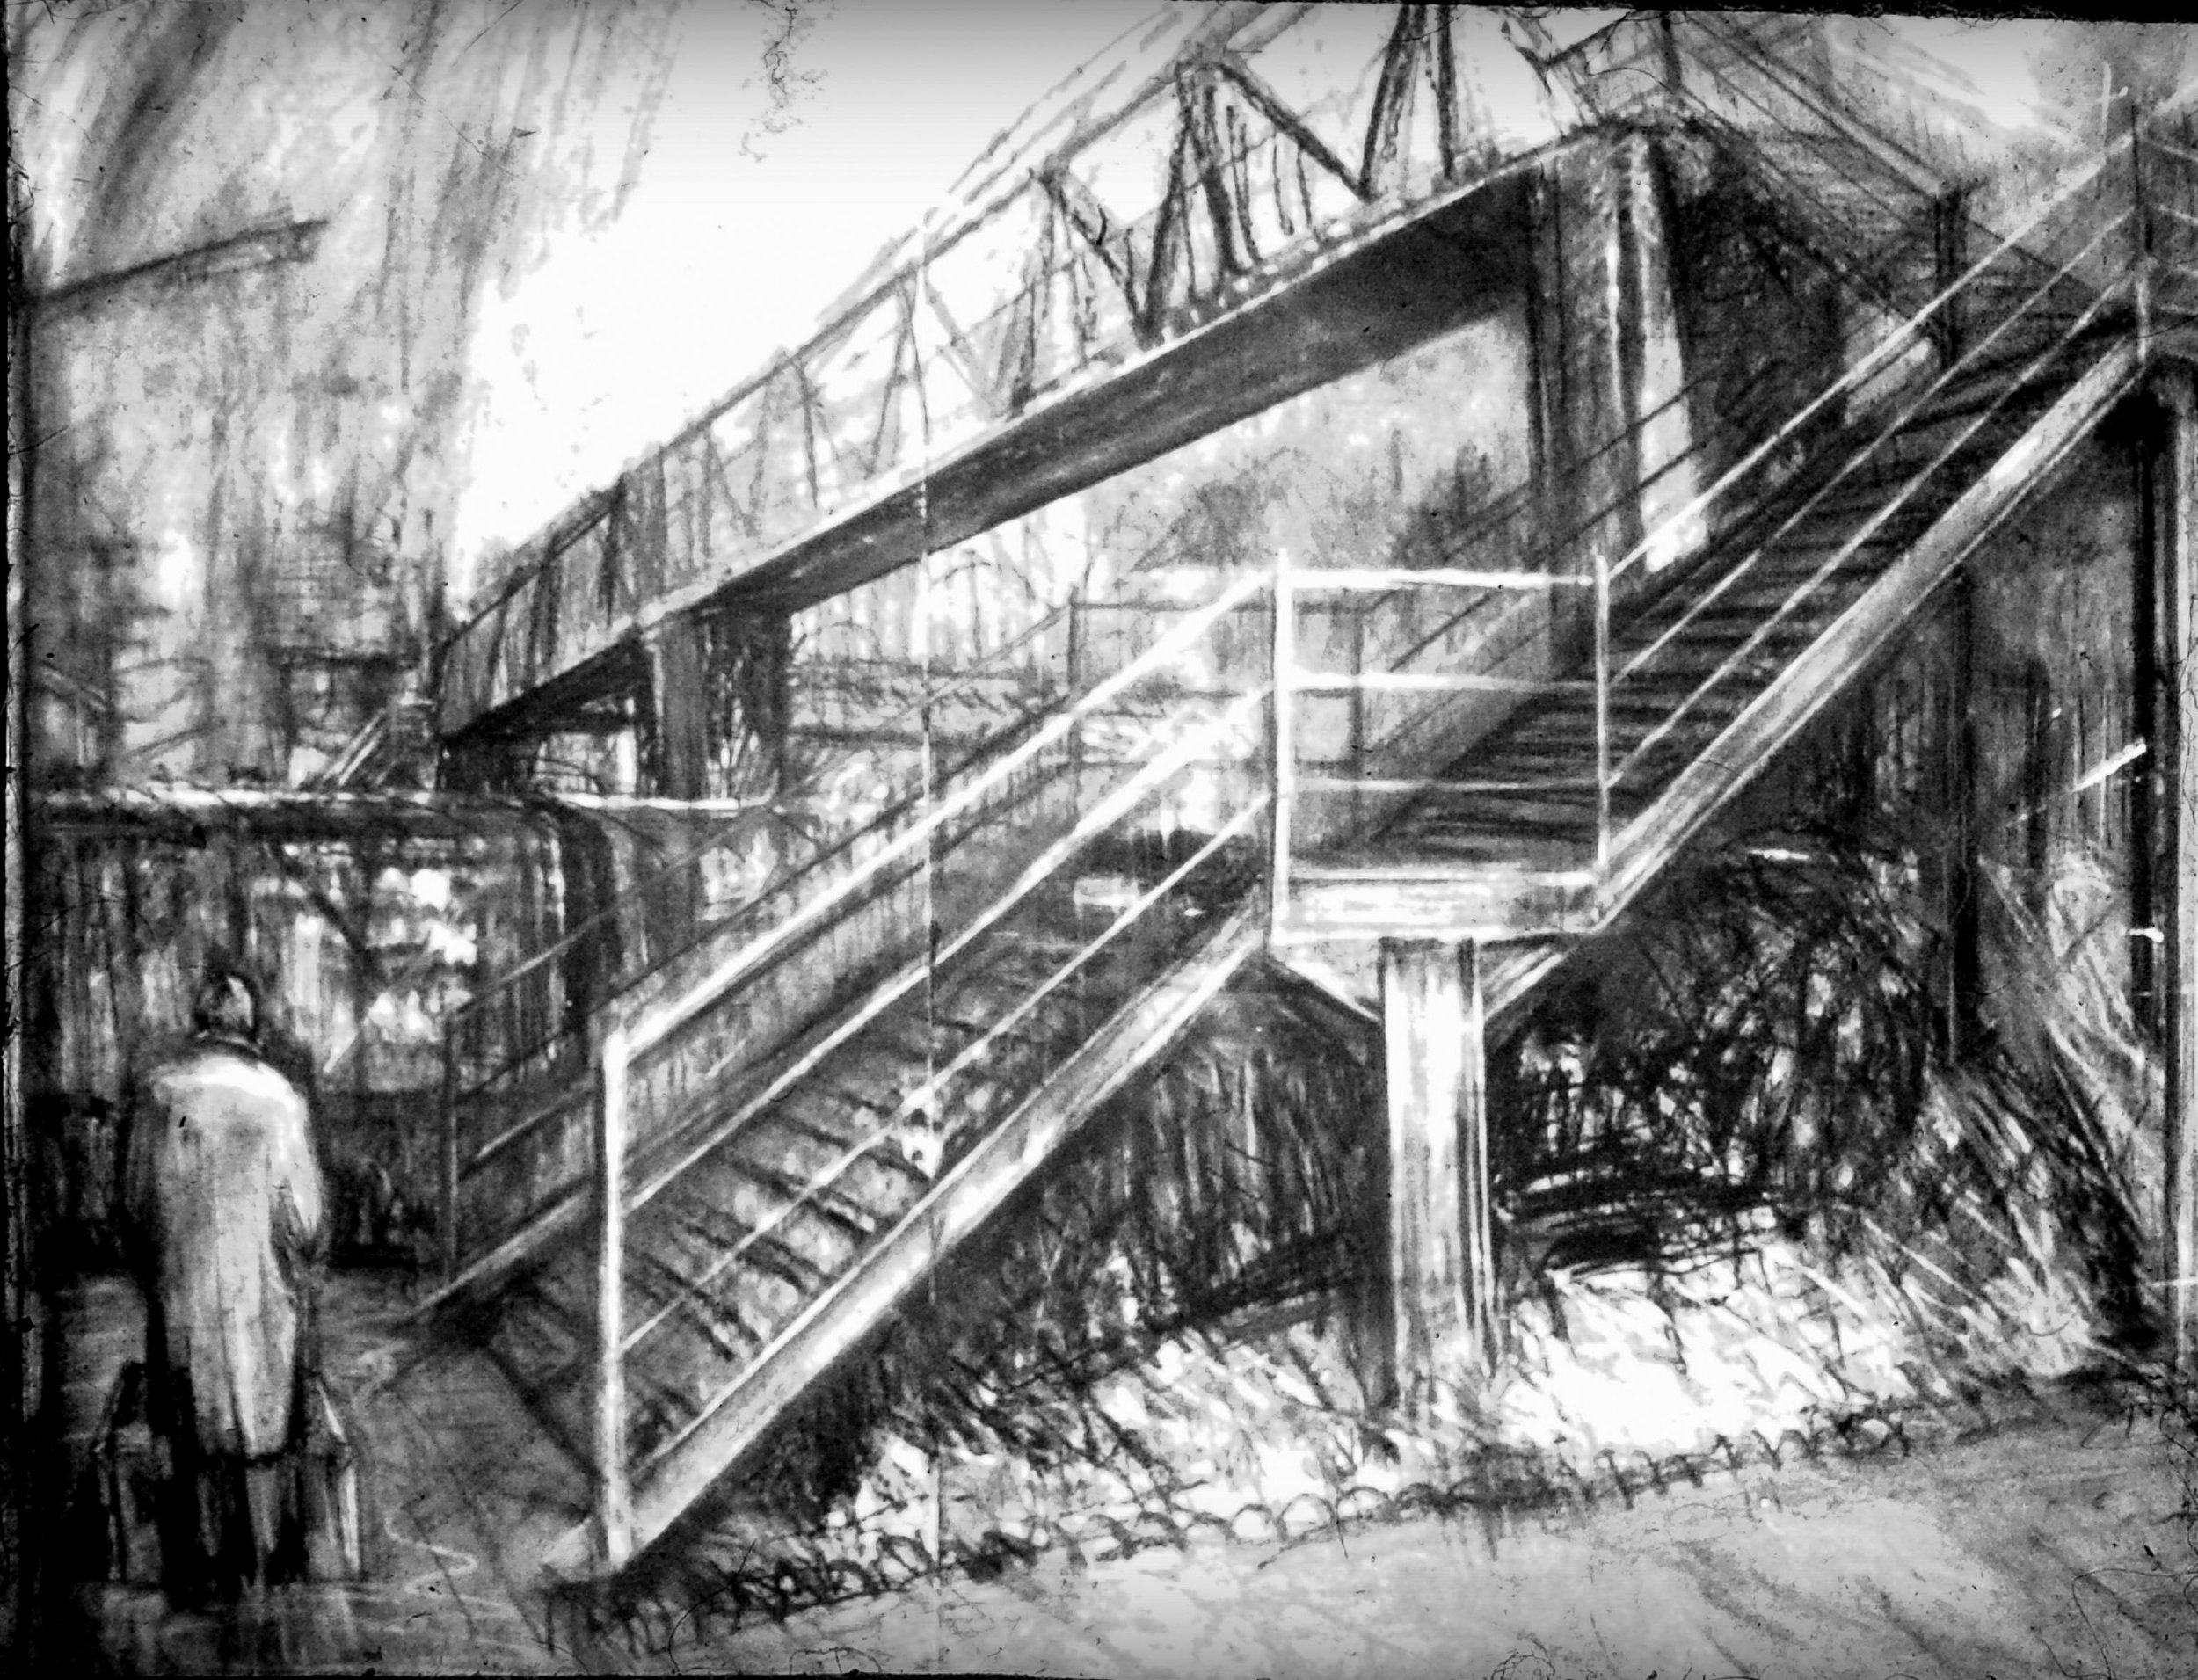  Jacob's Ladder, London W13 (1991)  charcoal and chalk on paper, 55" x 70" 